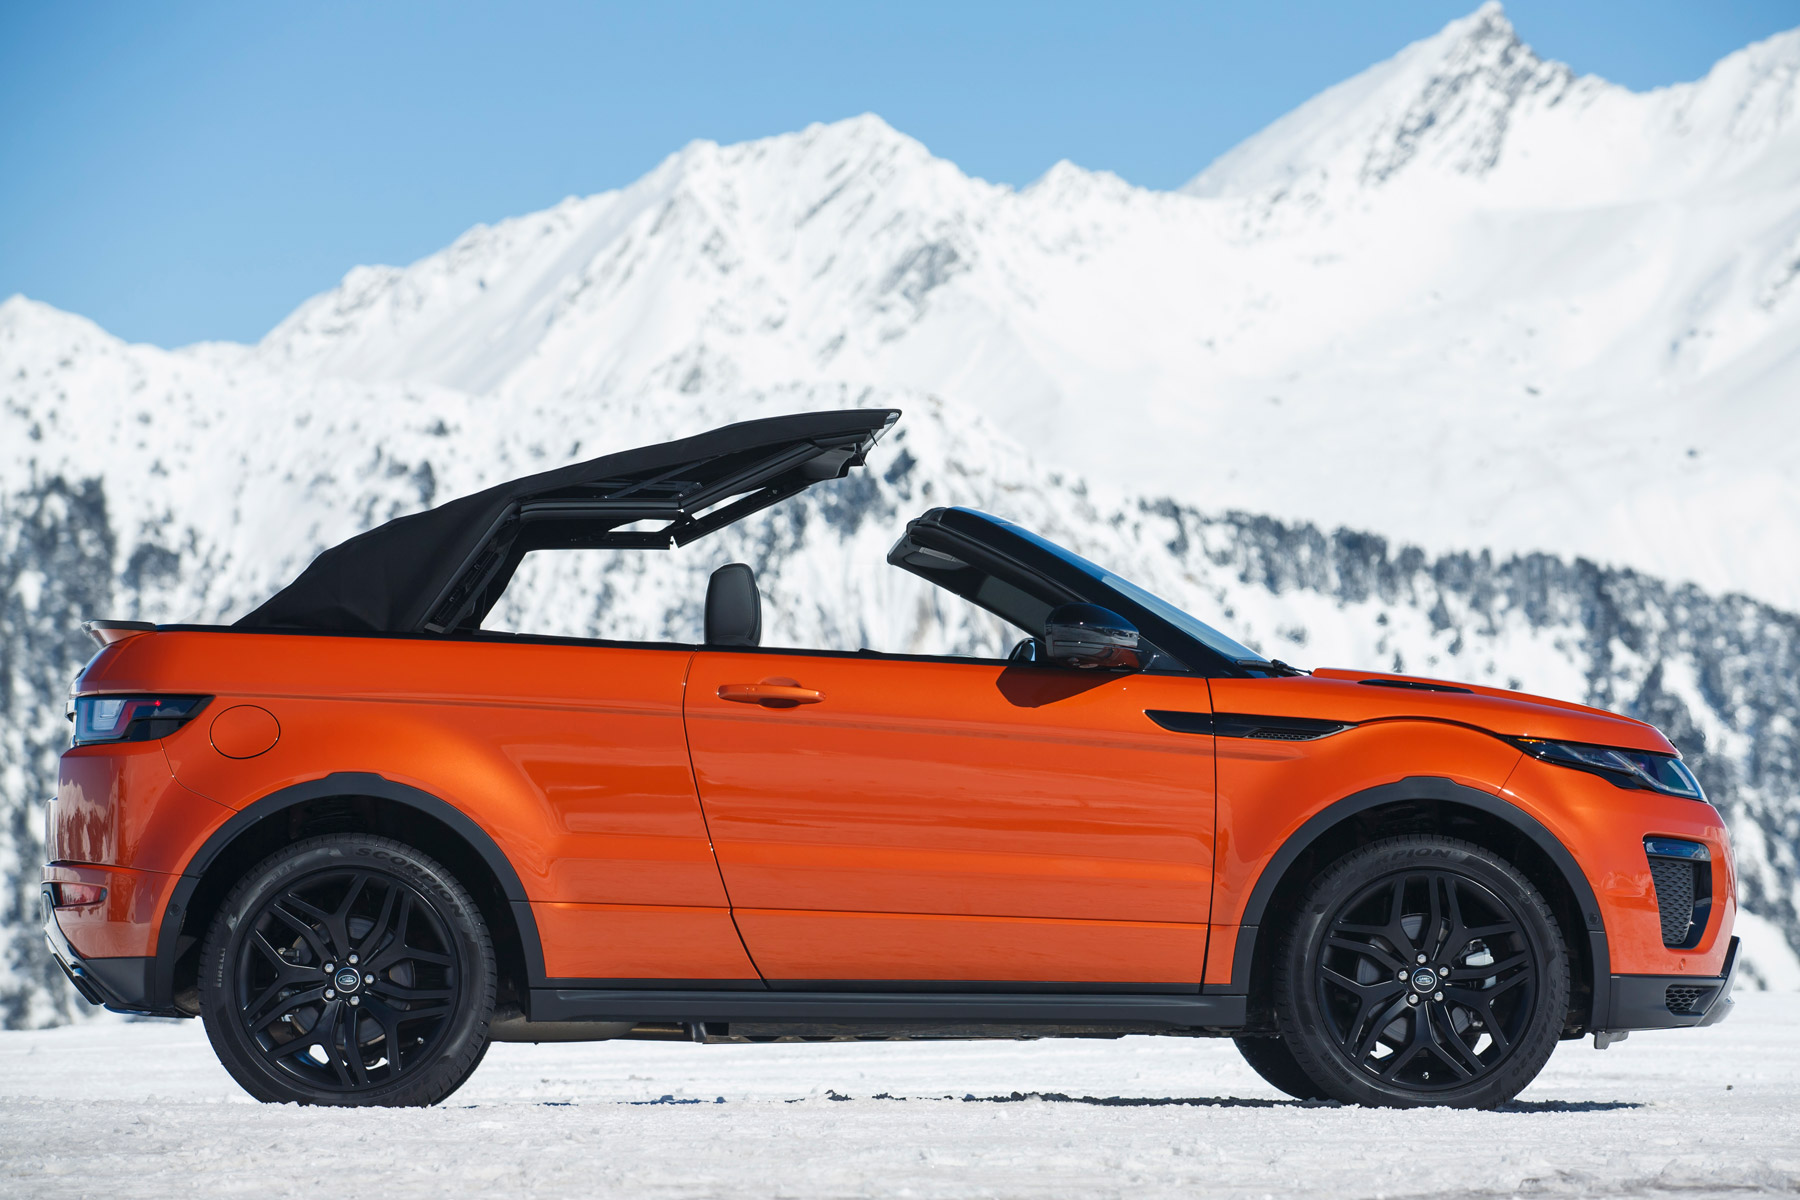 2016 Range Rover Evoque Convertible review: first drive